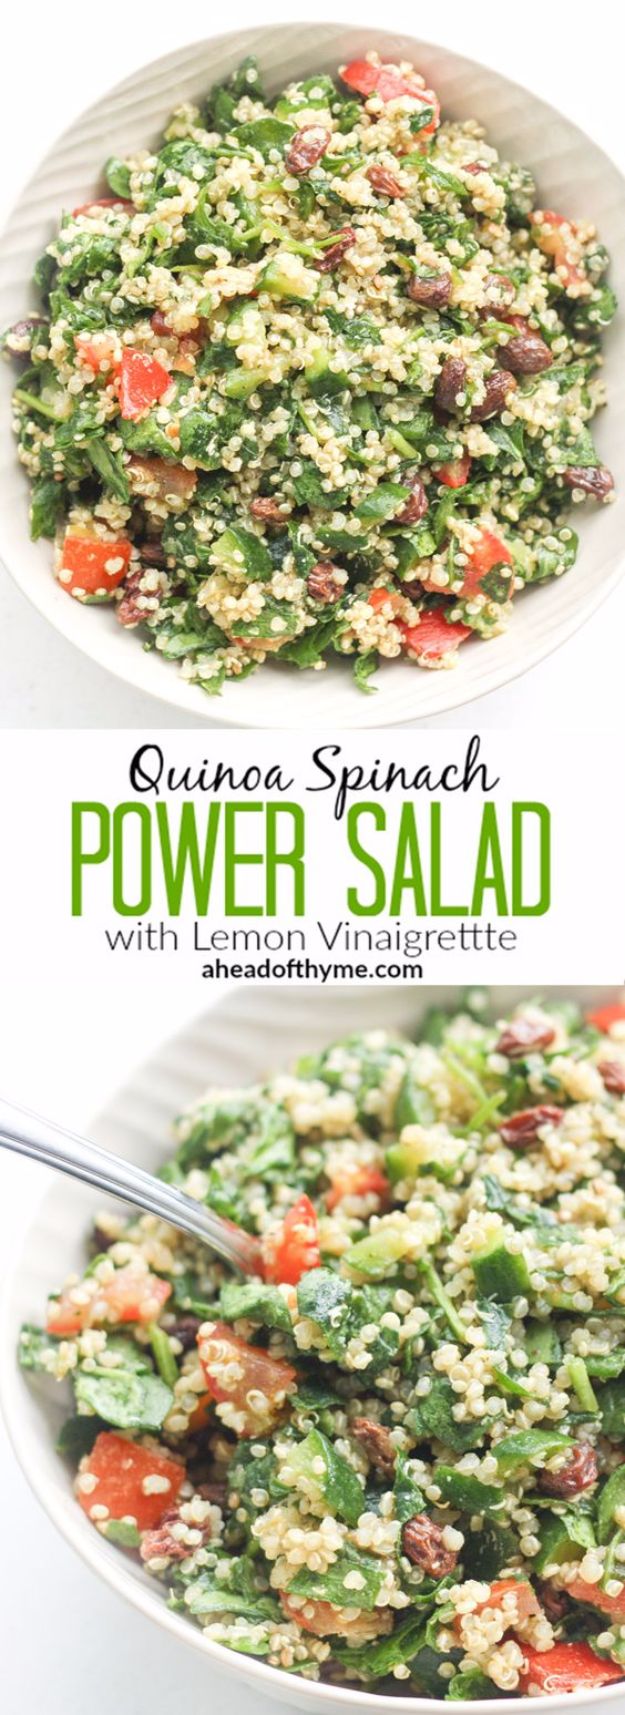 Best Spinach Recipes - Quinoa Spinach Power Salad - Easy, Healthy Lowfat Recipe Ideas for Dinner, Salads, Lunches, Sides, Smoothies and Even Dessert - Qucik and Creative Ideas for Vegetables - Cheesy, Creamed, Country Style Favorites for Family and For Kids #recipes #vegetablerecipes #spinach